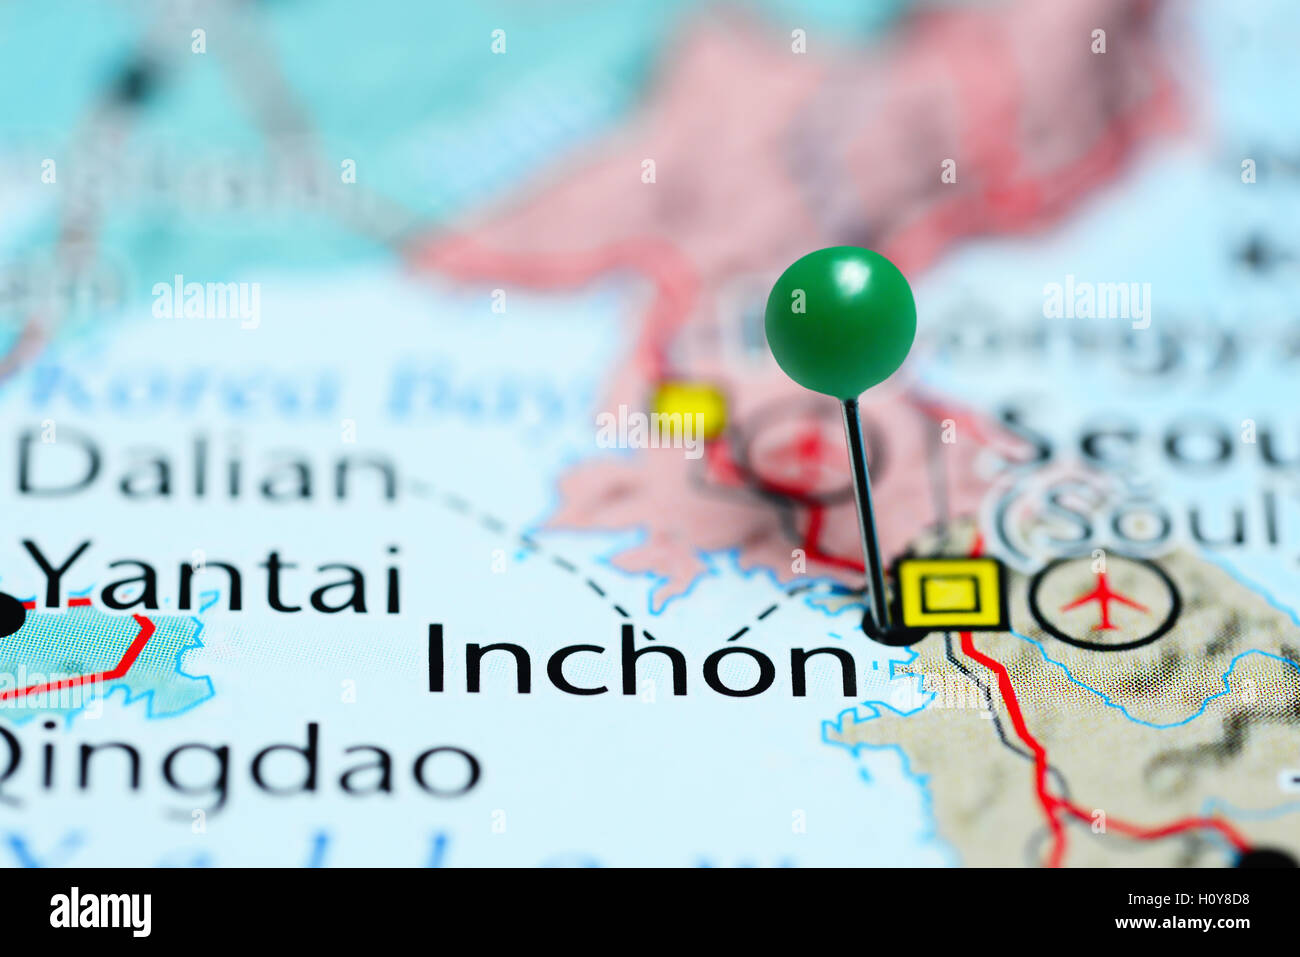 Inchon pinned on a map of South Korea Stock Photo